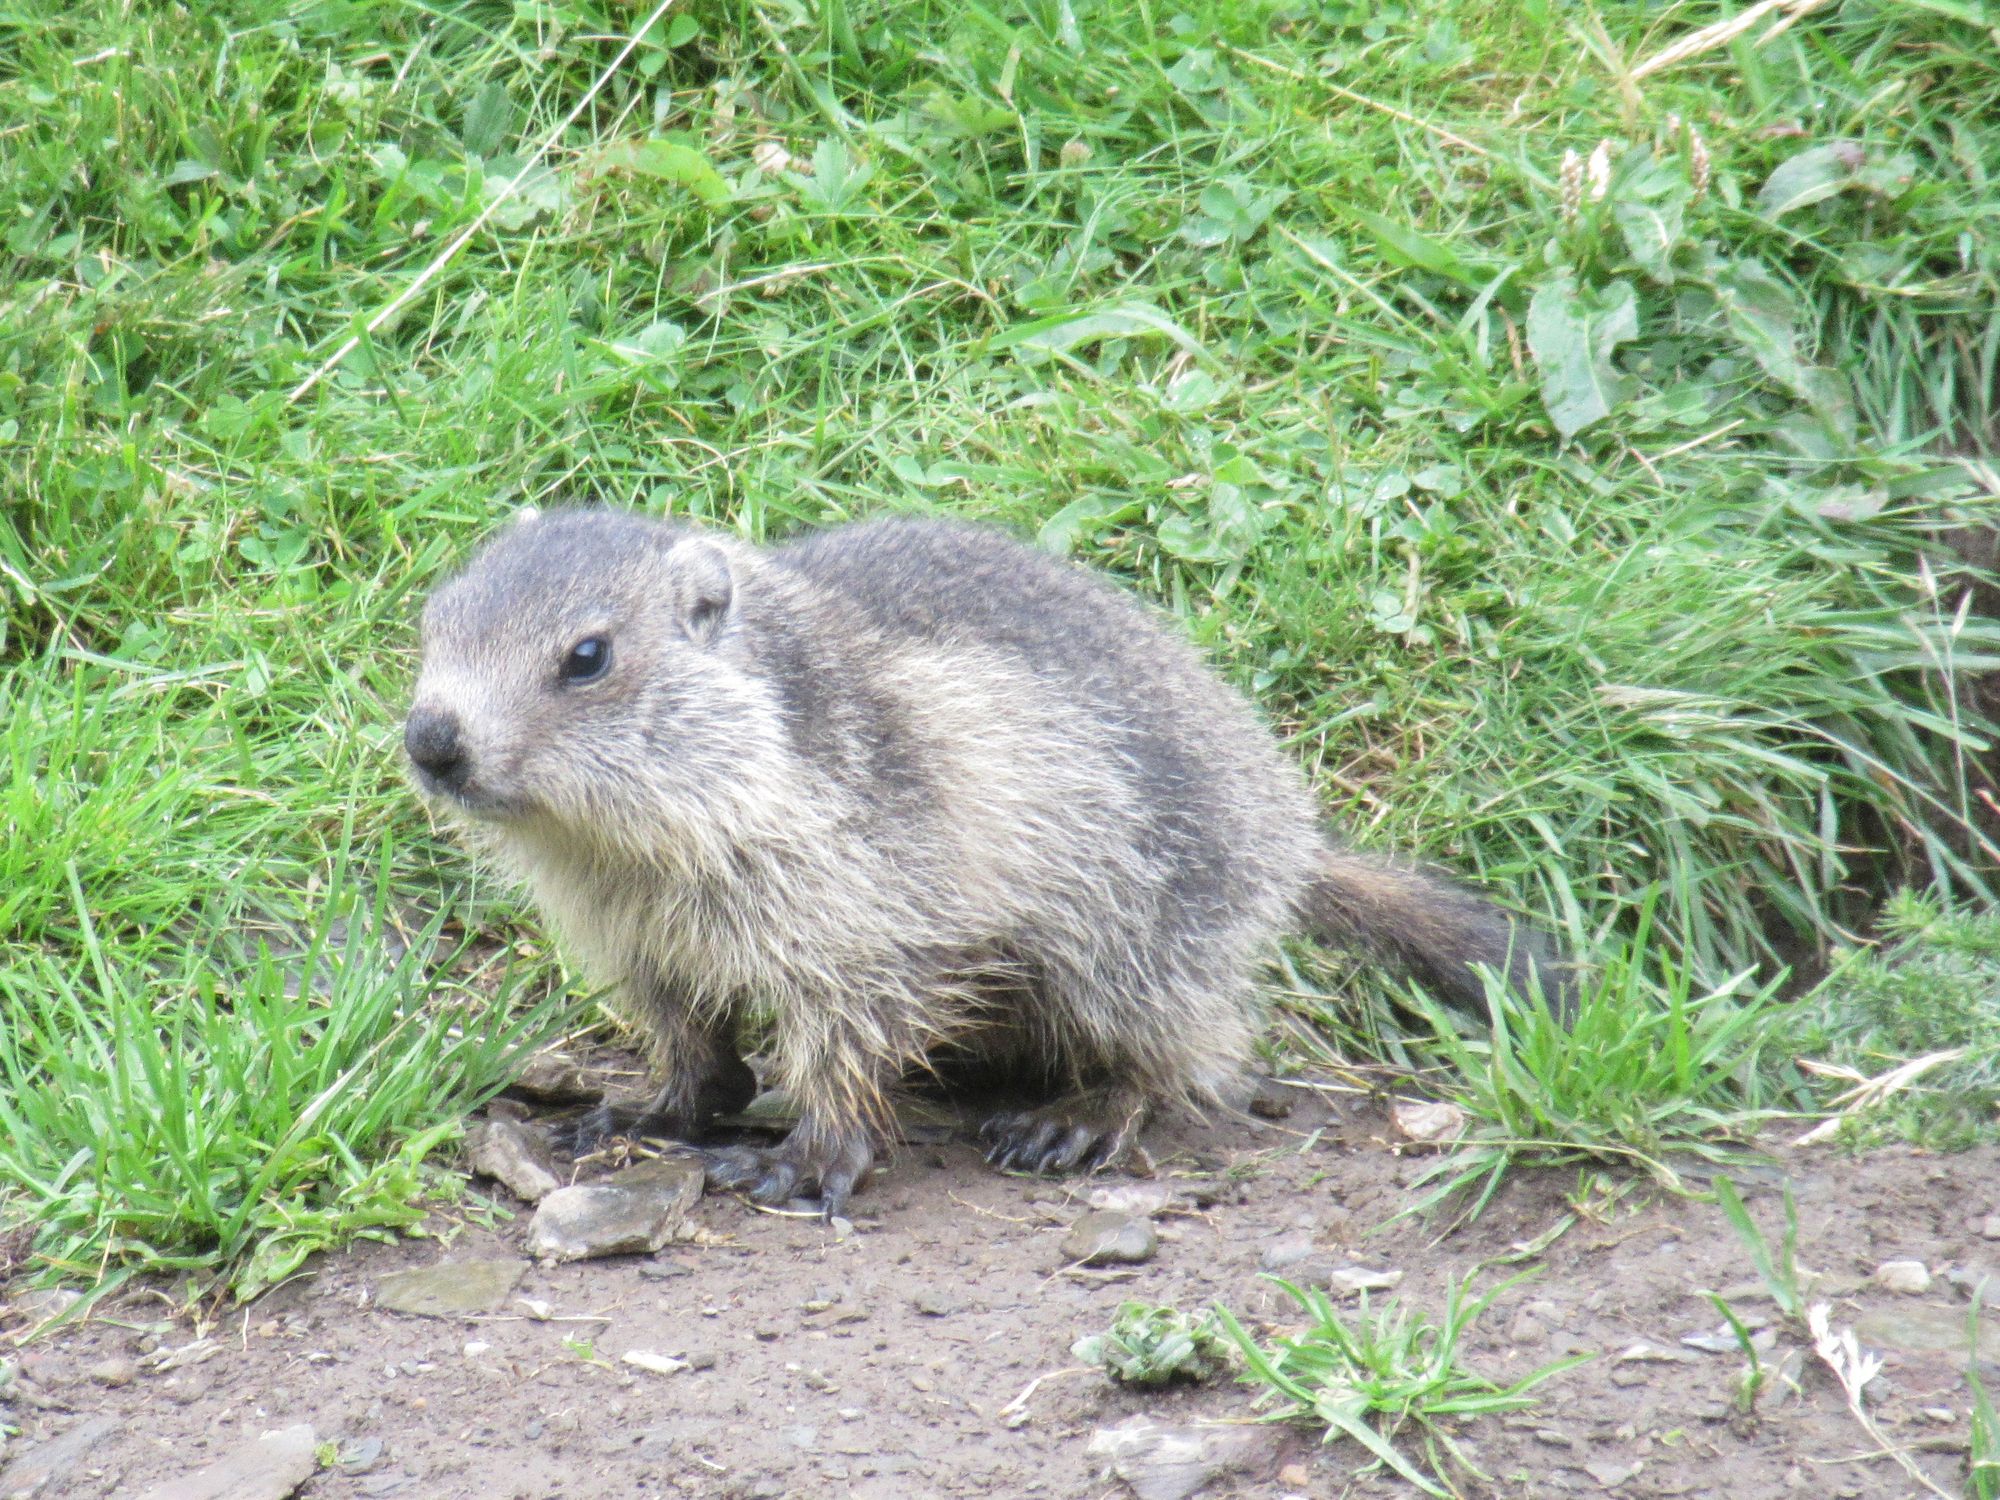 There are some very tame marmots in the Eyne valley.